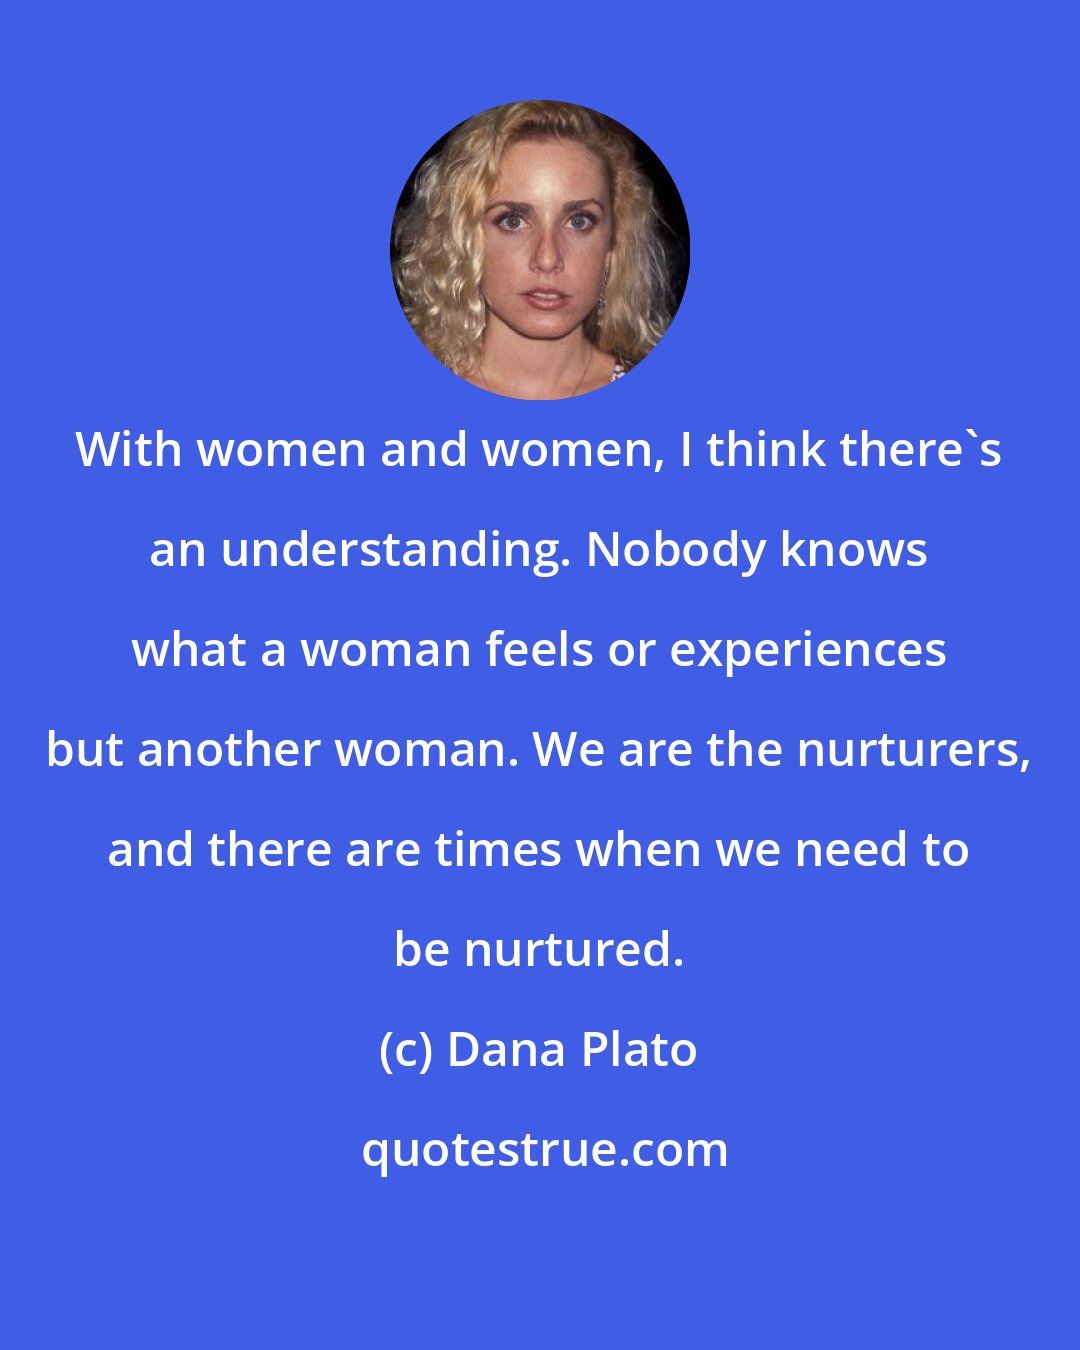 Dana Plato: With women and women, I think there's an understanding. Nobody knows what a woman feels or experiences but another woman. We are the nurturers, and there are times when we need to be nurtured.